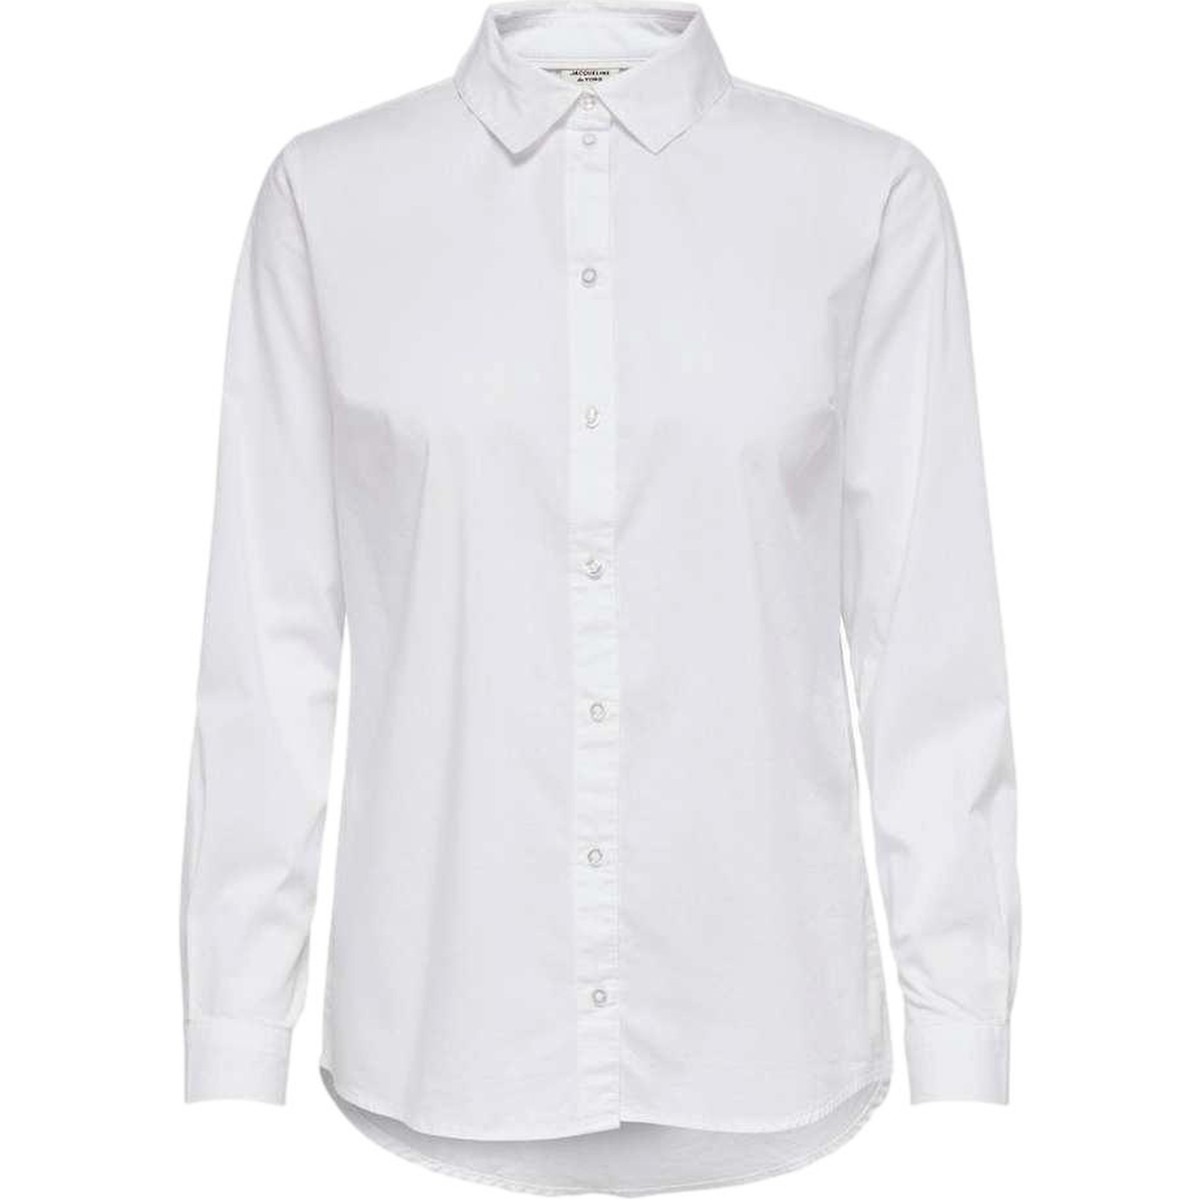 Jacqueline De Yong Shirt in White for Woman from Spartoo GOOFASH